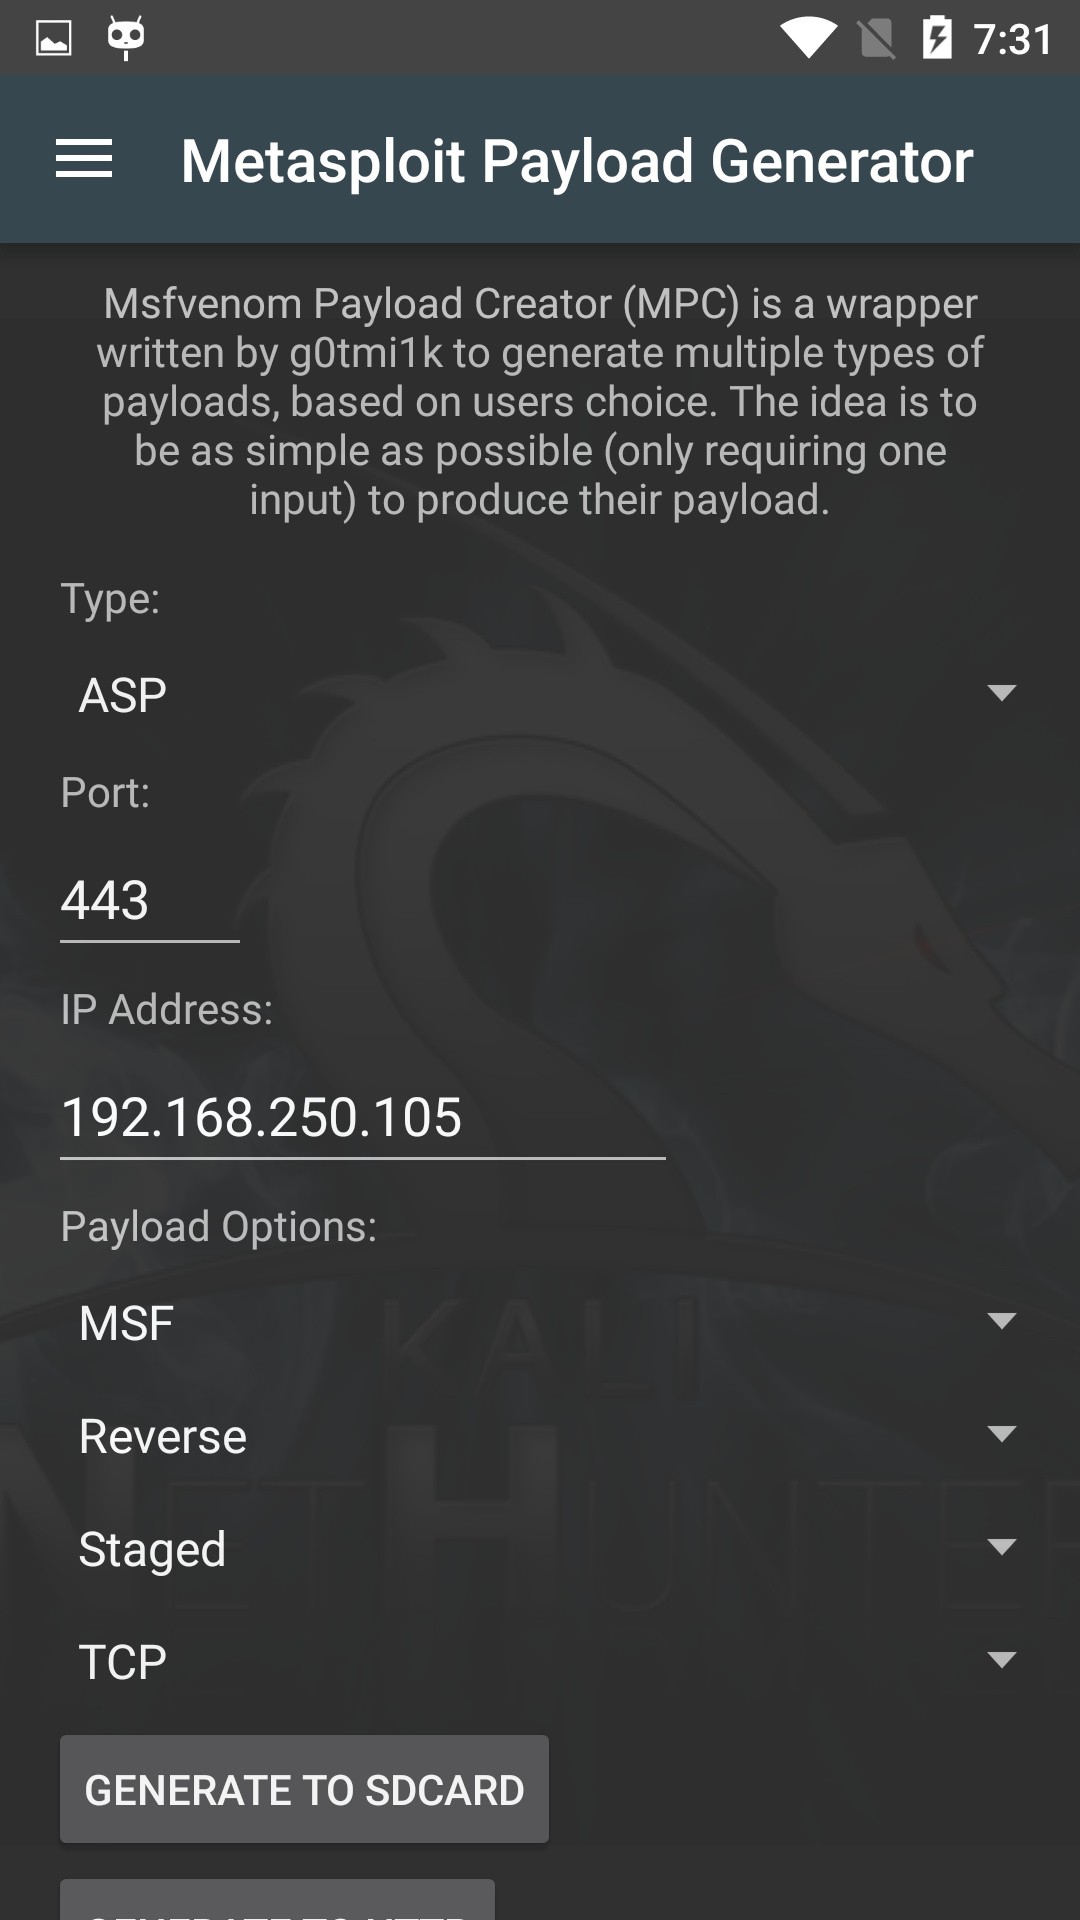 kali linux nethunter android